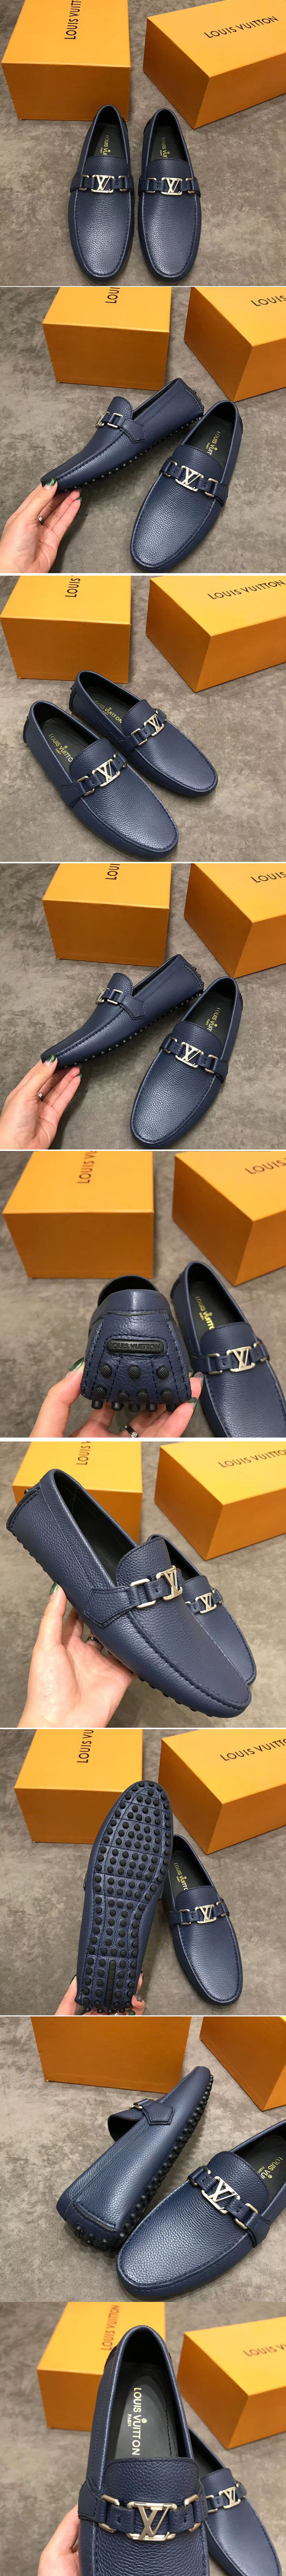 Replica Louis Vuitton LV Hockenheim Loafer And Shoes Blue Calf Leather